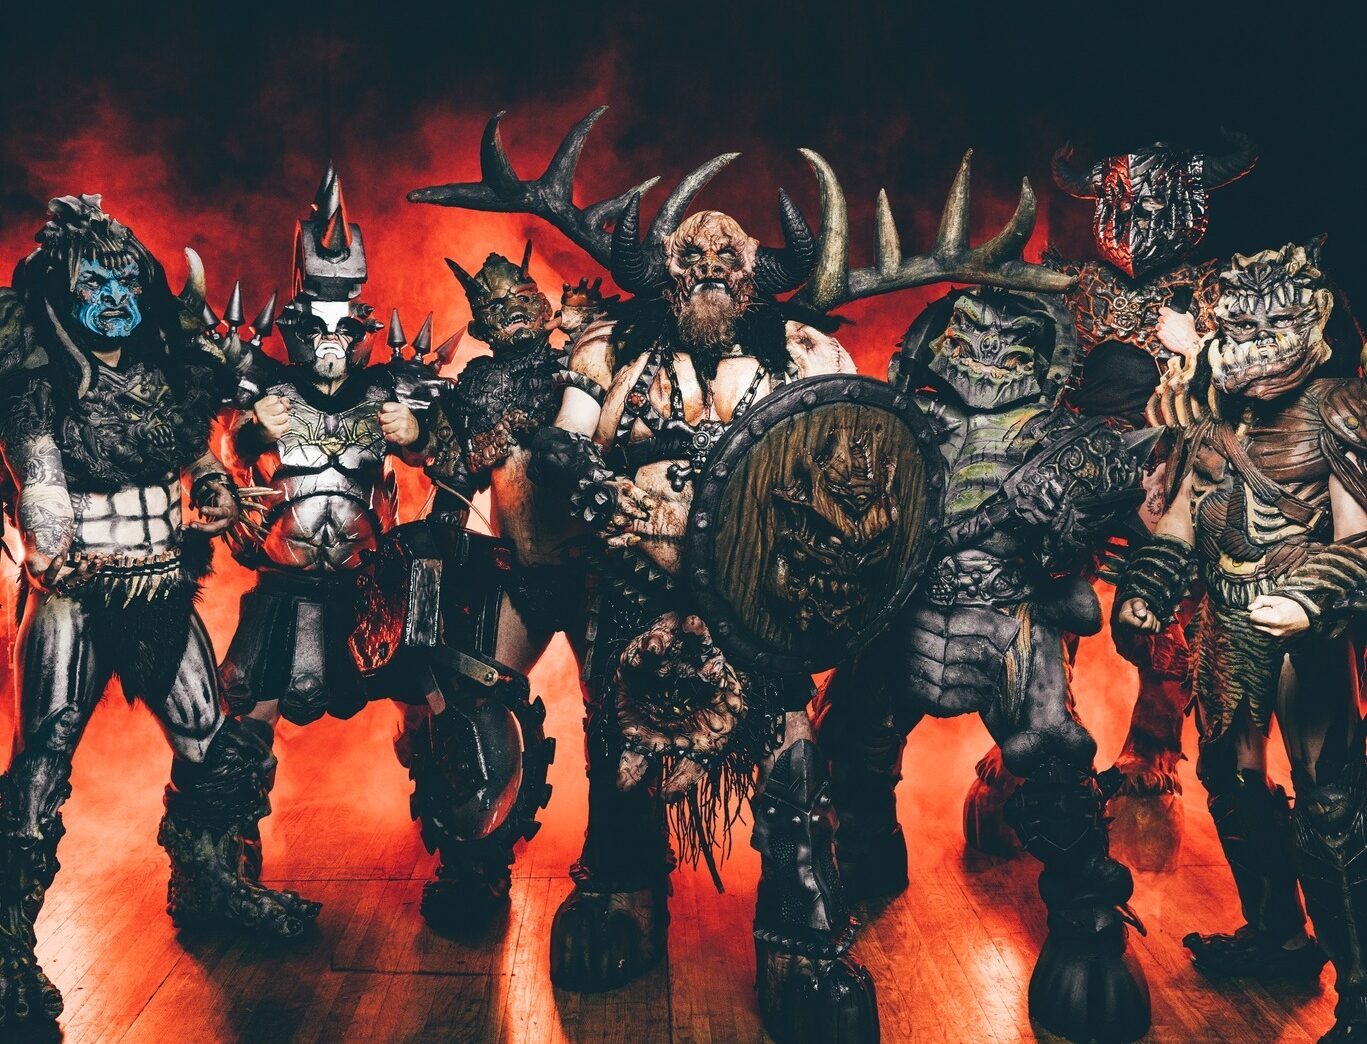 Gwar mark 10th anniversary of 'Battle Maximus' with extended edition release